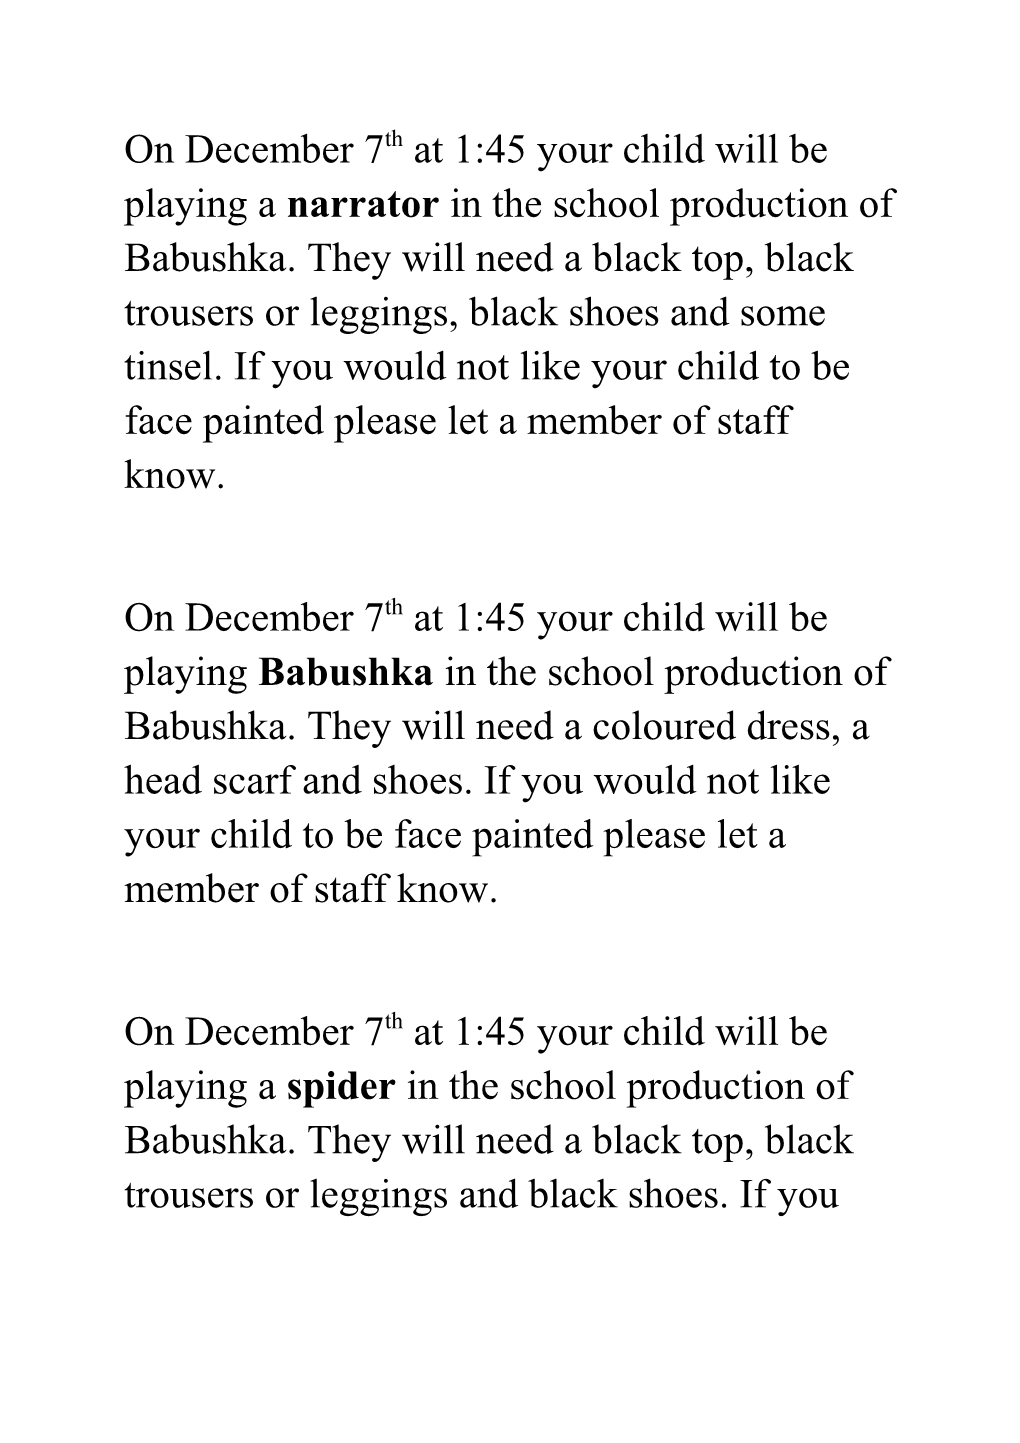 On December 7Th at 1:45 Your Child Will Be Playing a Narrator in the School Production